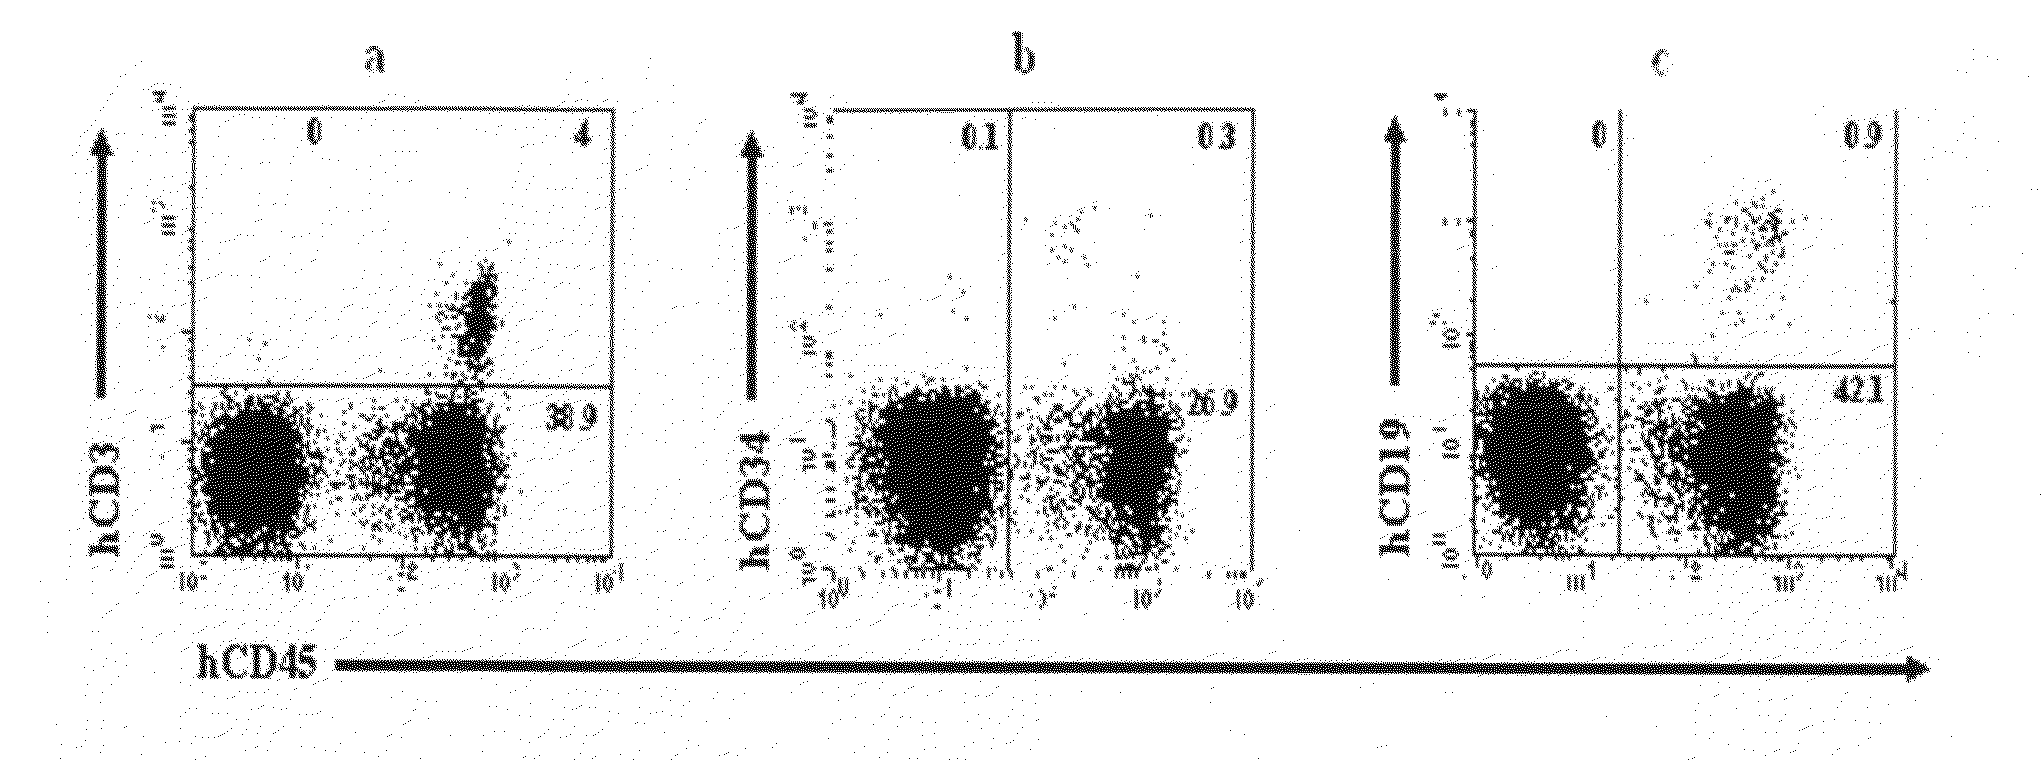 Composition for in vivo transplantation for treatment of human cervical cancer comprising mononuclear cells derived from umbilical cord blood